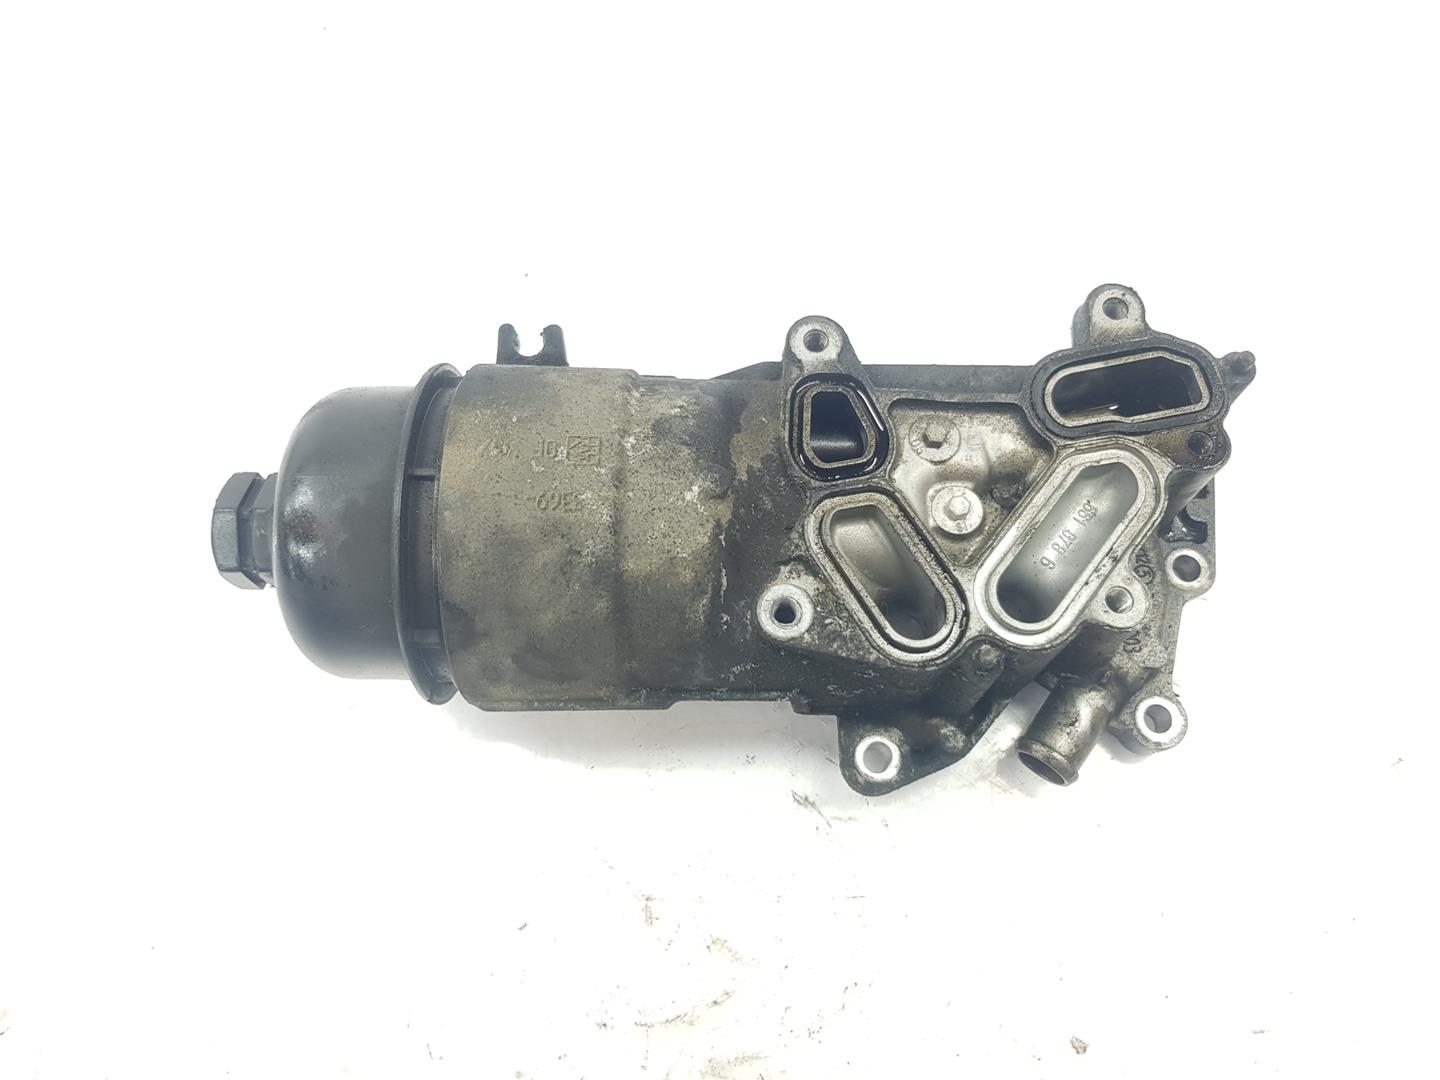 VOLVO C30 1 generation (2006-2013) Other Engine Compartment Parts 31321630, 31321630, 2222DL 24133234